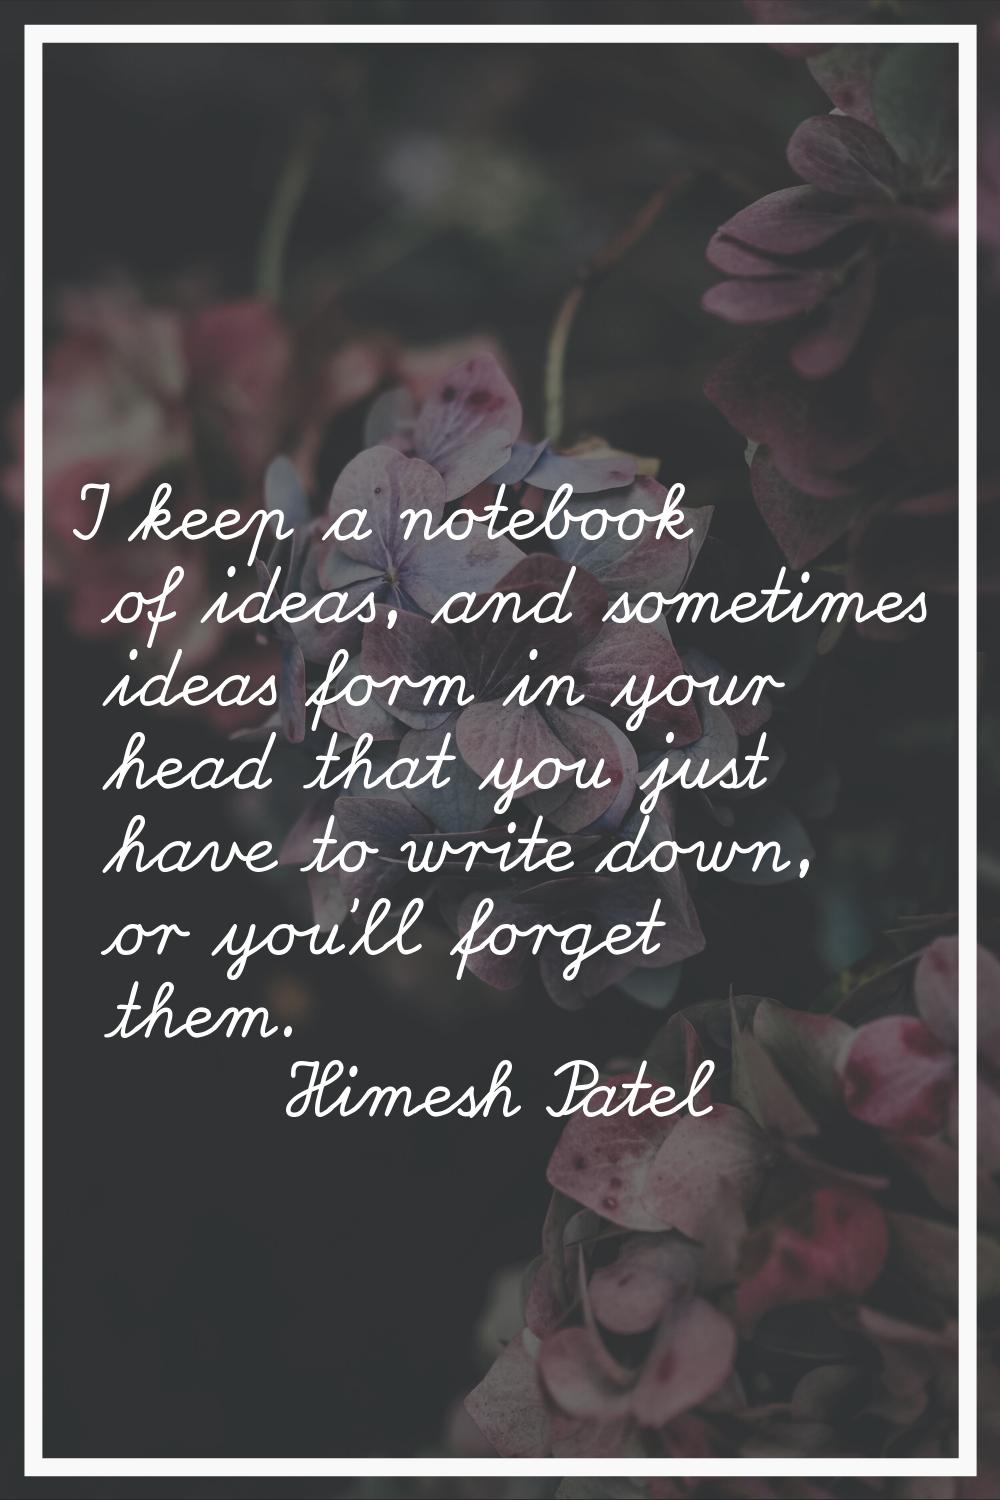 I keep a notebook of ideas, and sometimes ideas form in your head that you just have to write down,